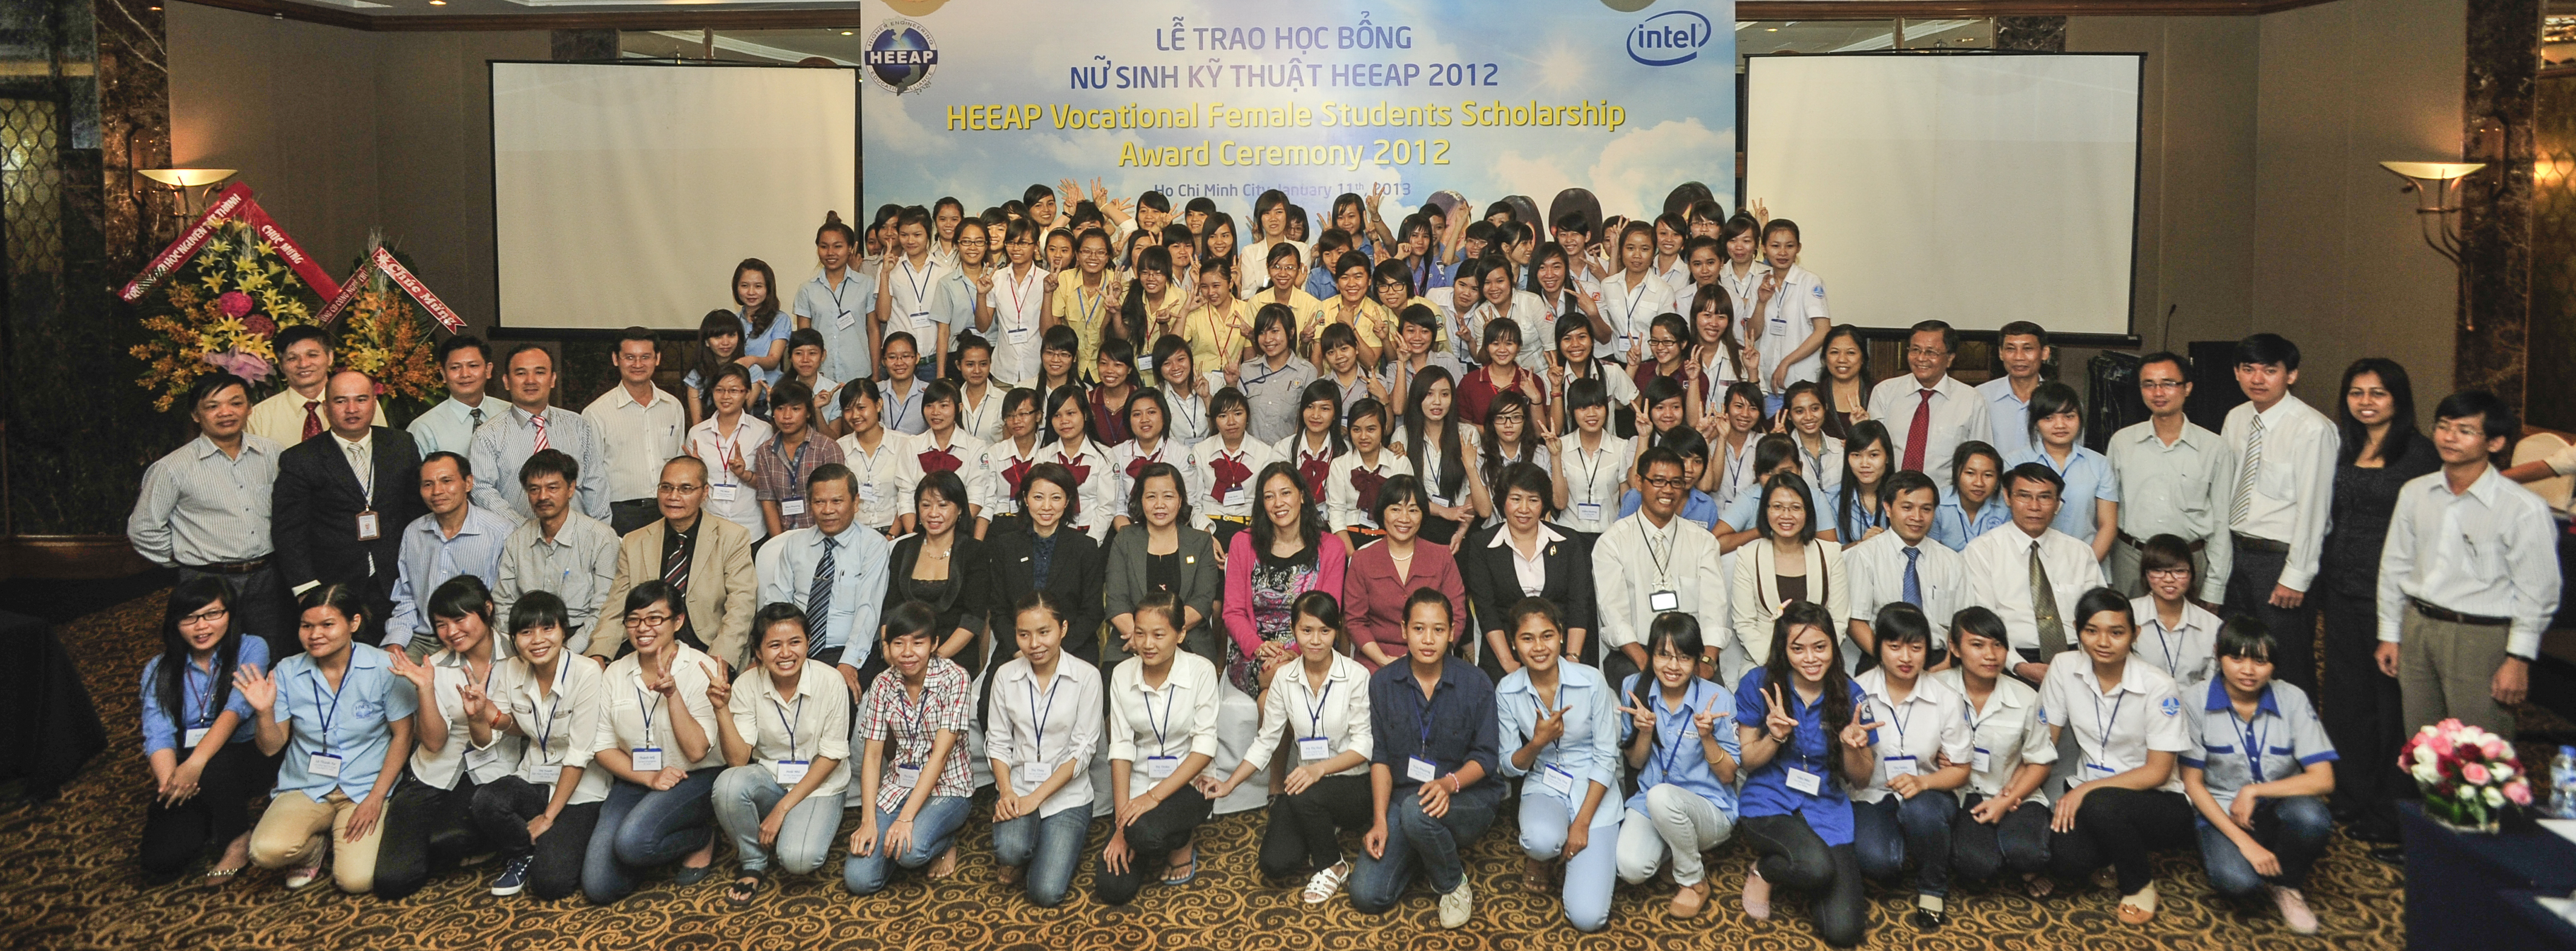 The first recipients of awards through the HEEAP Vocational Female Students Scholarship program were recognized at a ceremony held in Vietnam on January 11, 2013.